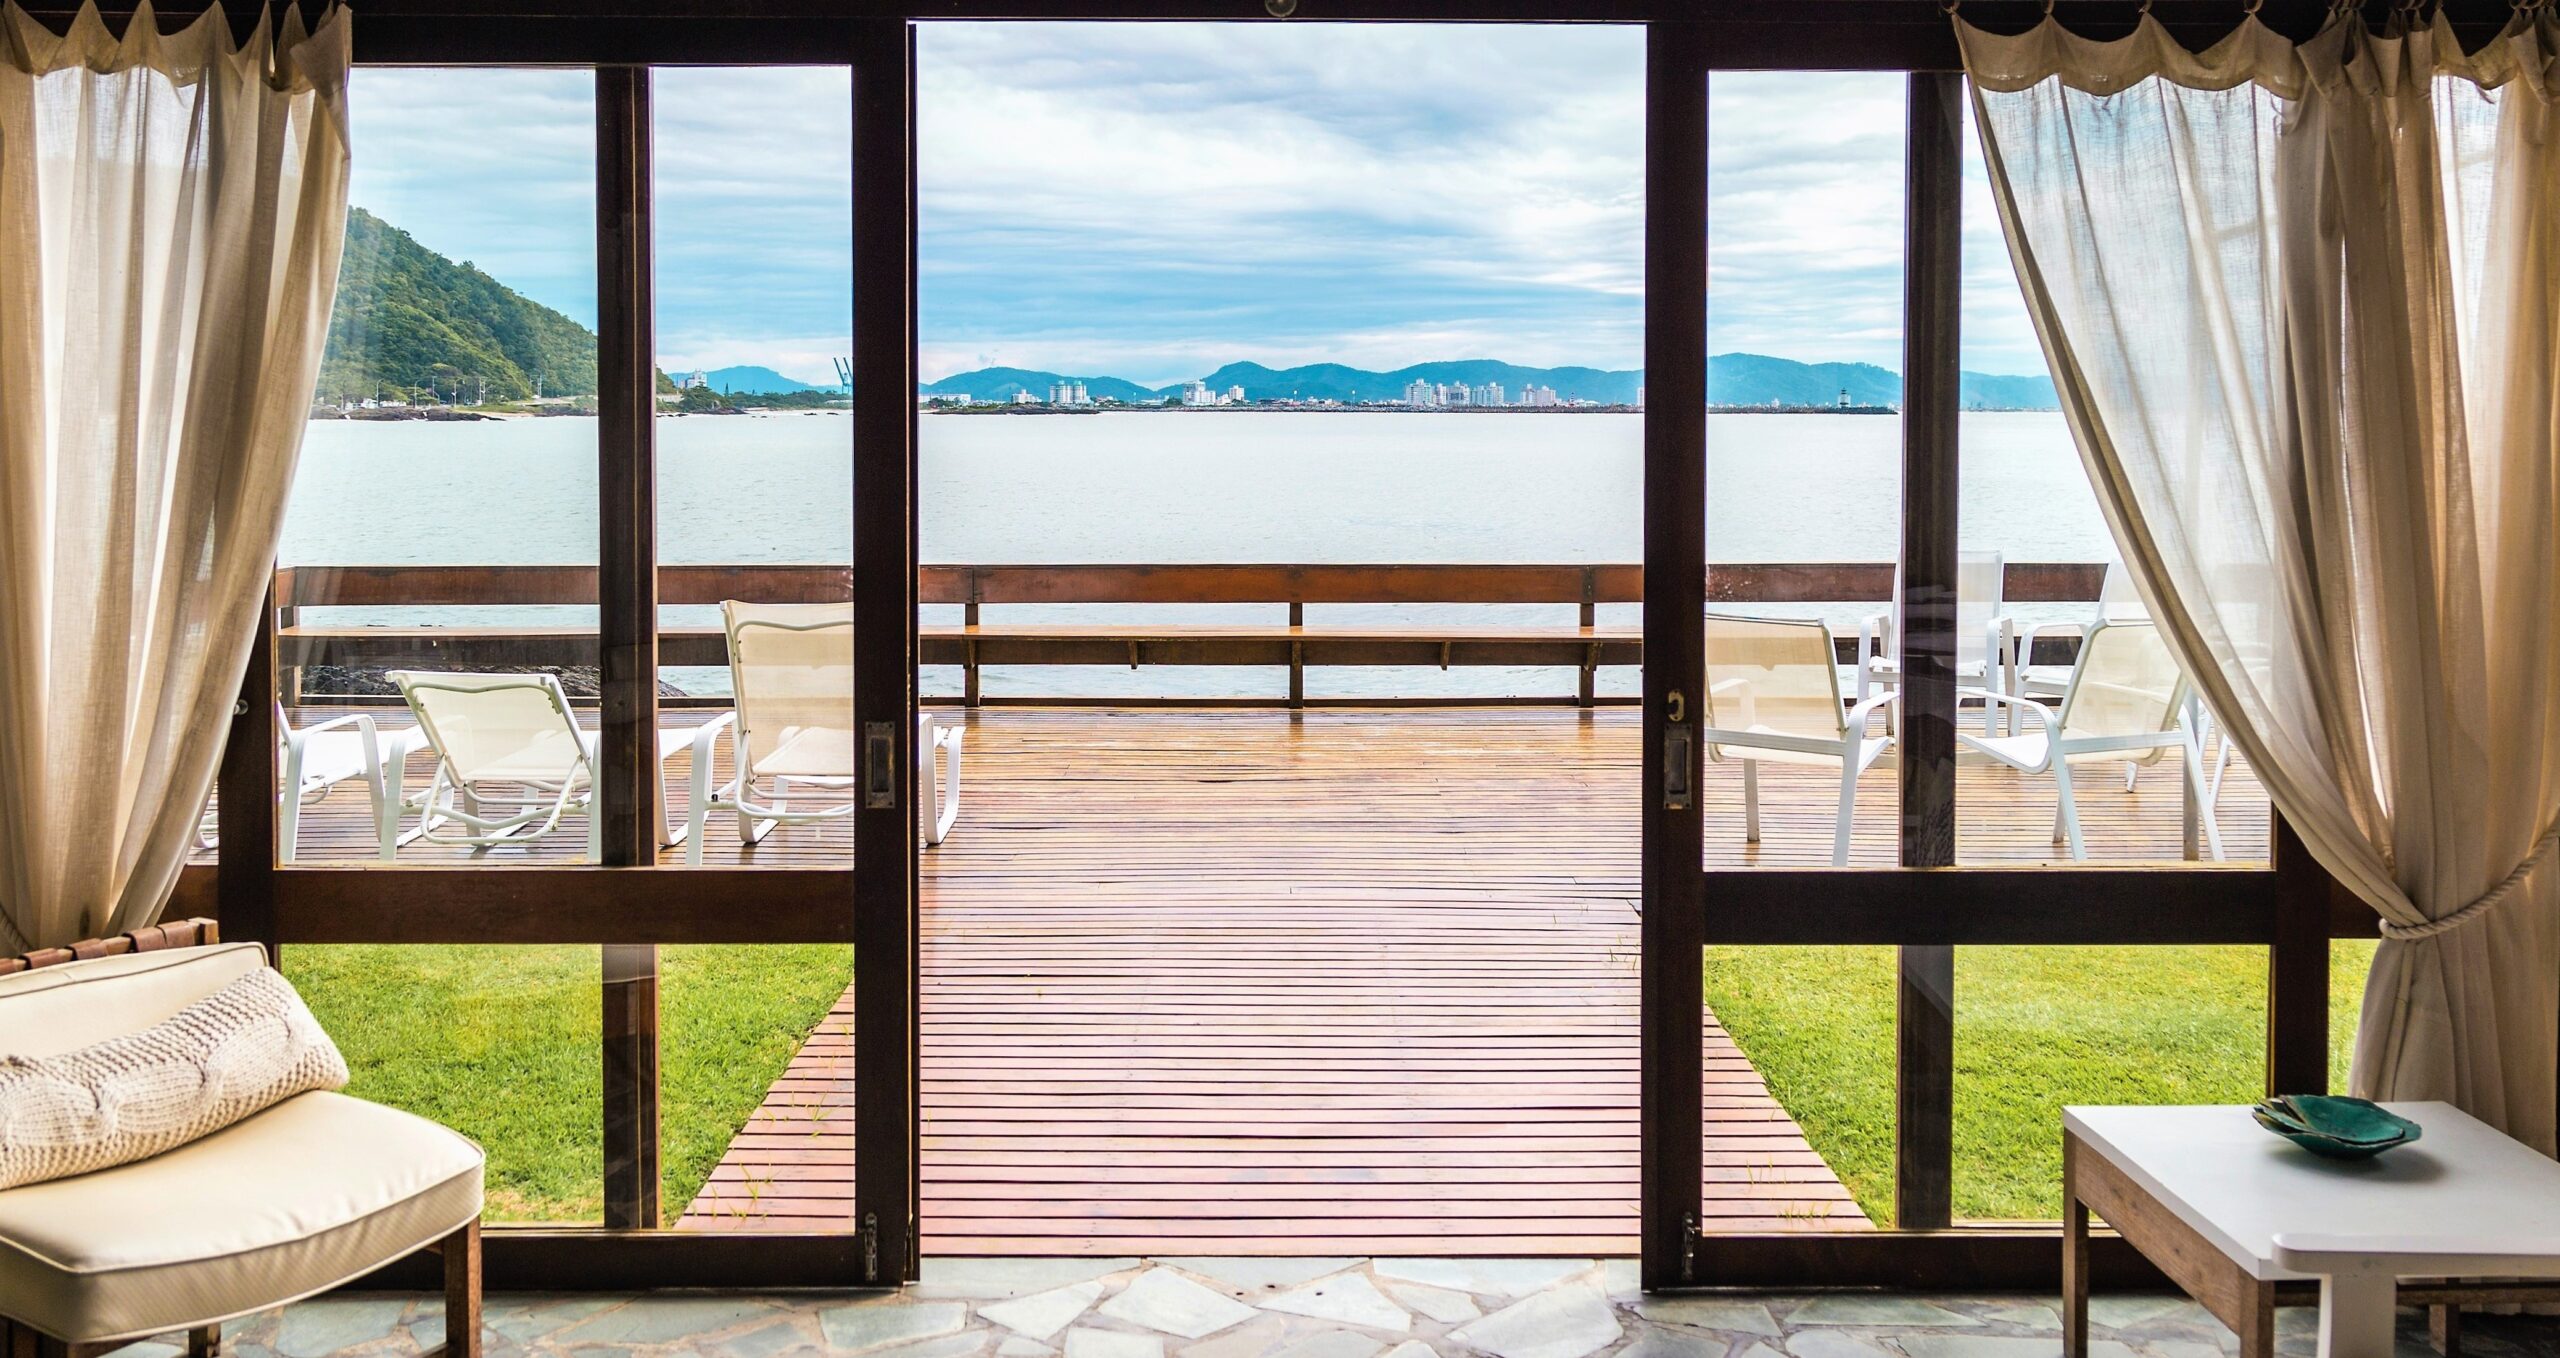 A set of sliding doors is opened on a deck with smooth transition between the inside of the home to the outside for a seamless indoor-outdoor living and with a bright coastal view in the background.